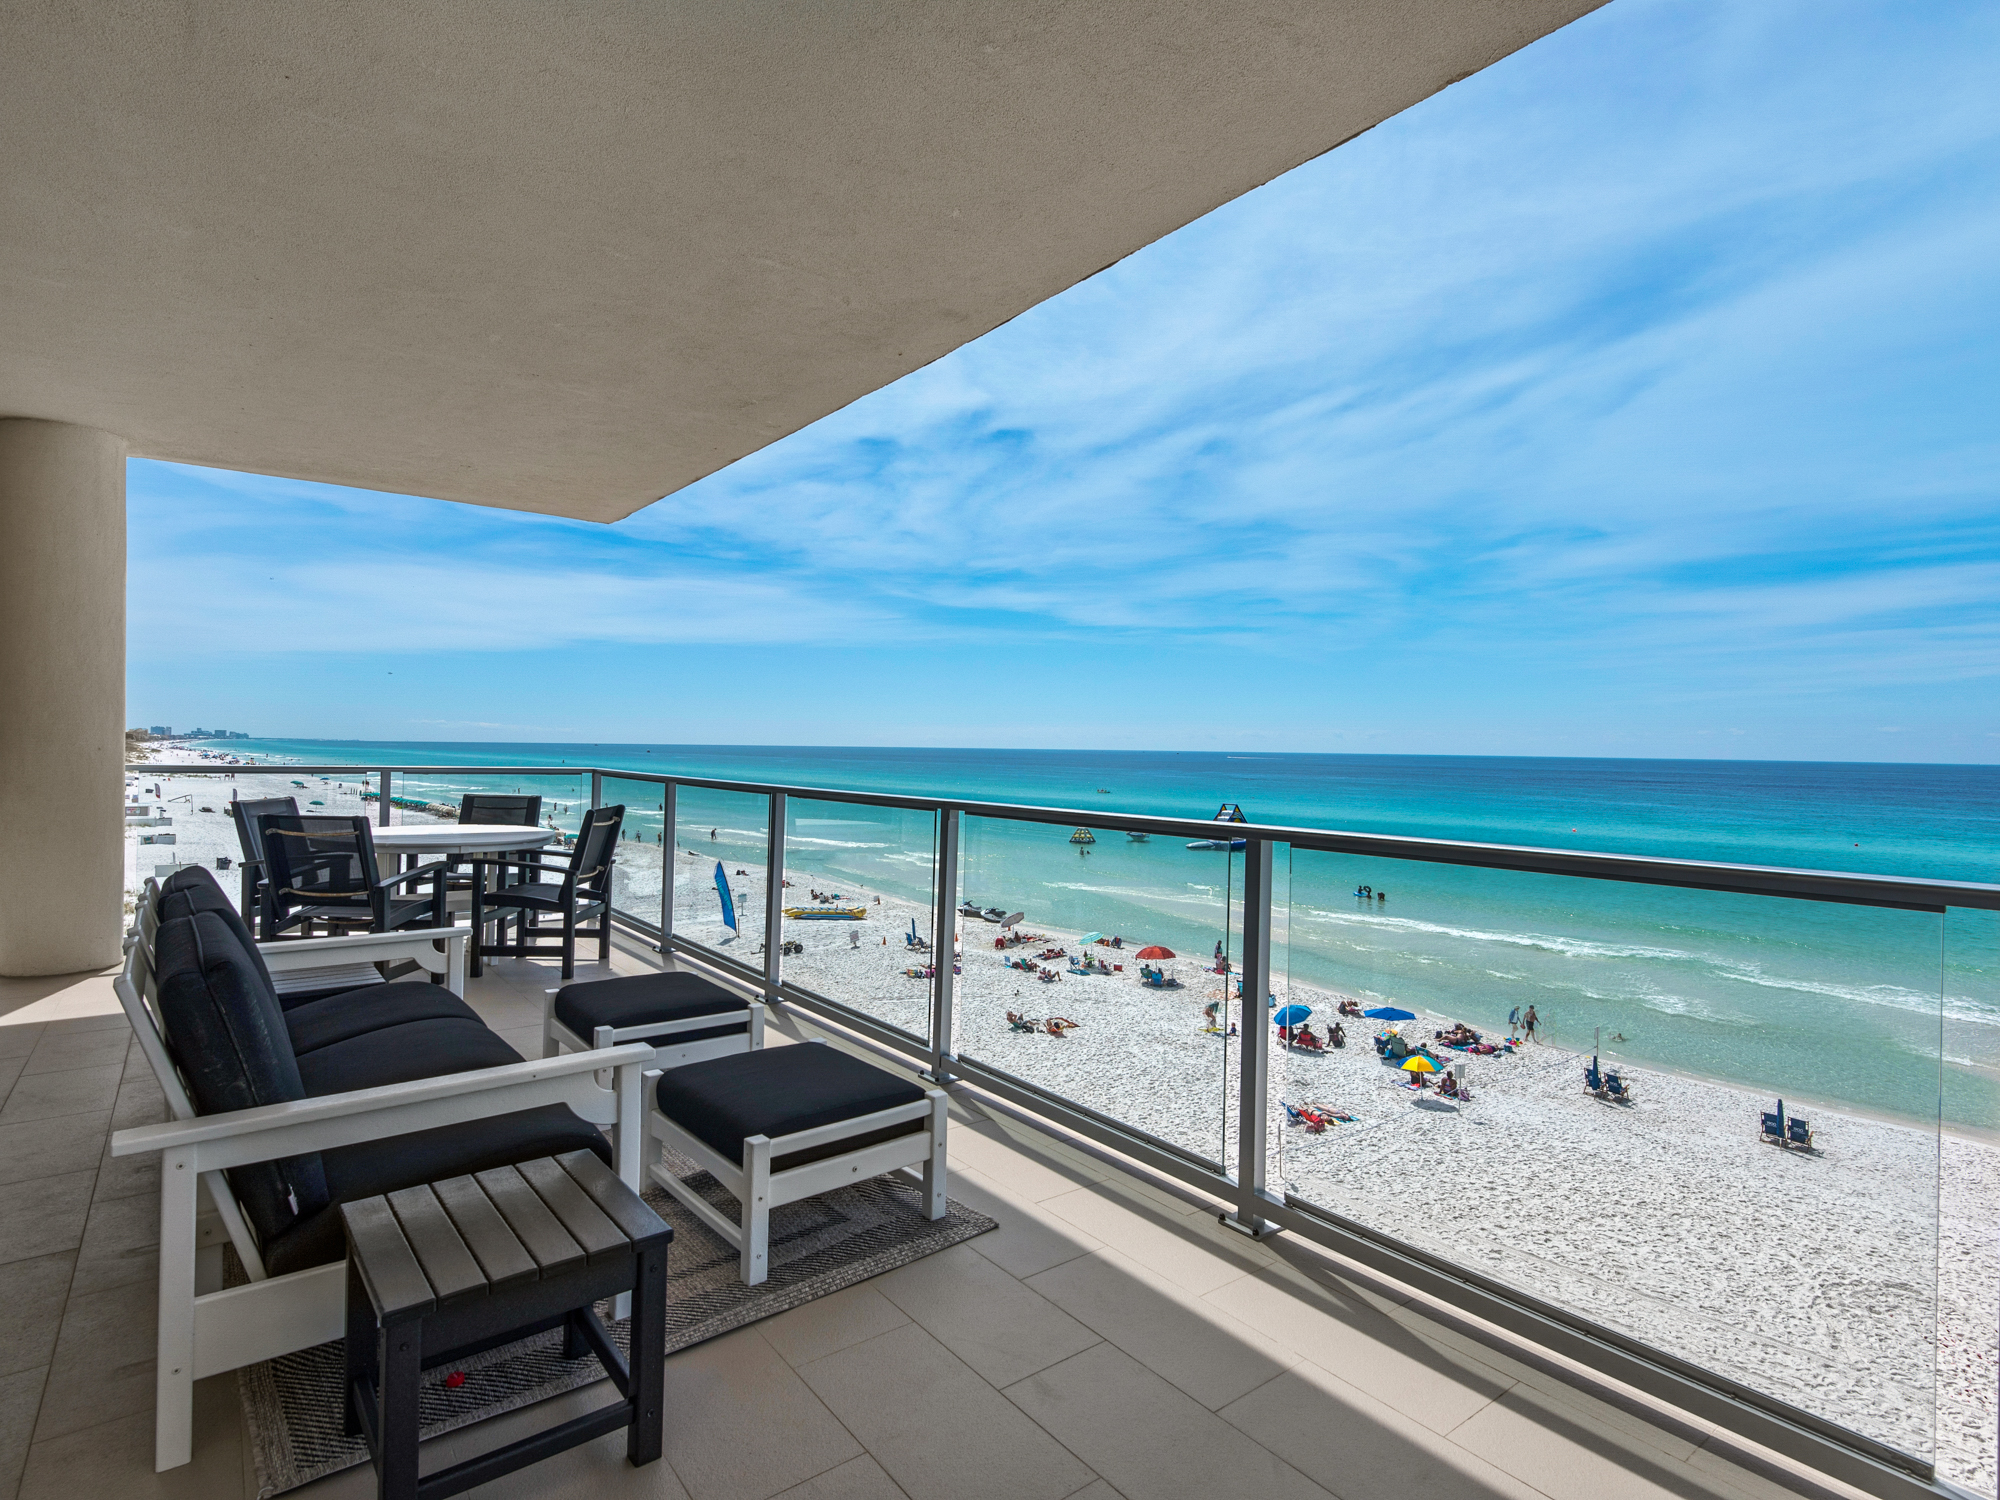 Families in the know plan a late spring beach vacation to enjoy the soft, white sand beaches of Northwest Florida with fewer crowds while saving on their Destin vacation rental. Rentals range from private homes to condominiums, including the new luxury condominiums at 1900 Ninety-Eight in Destin, Florida. 